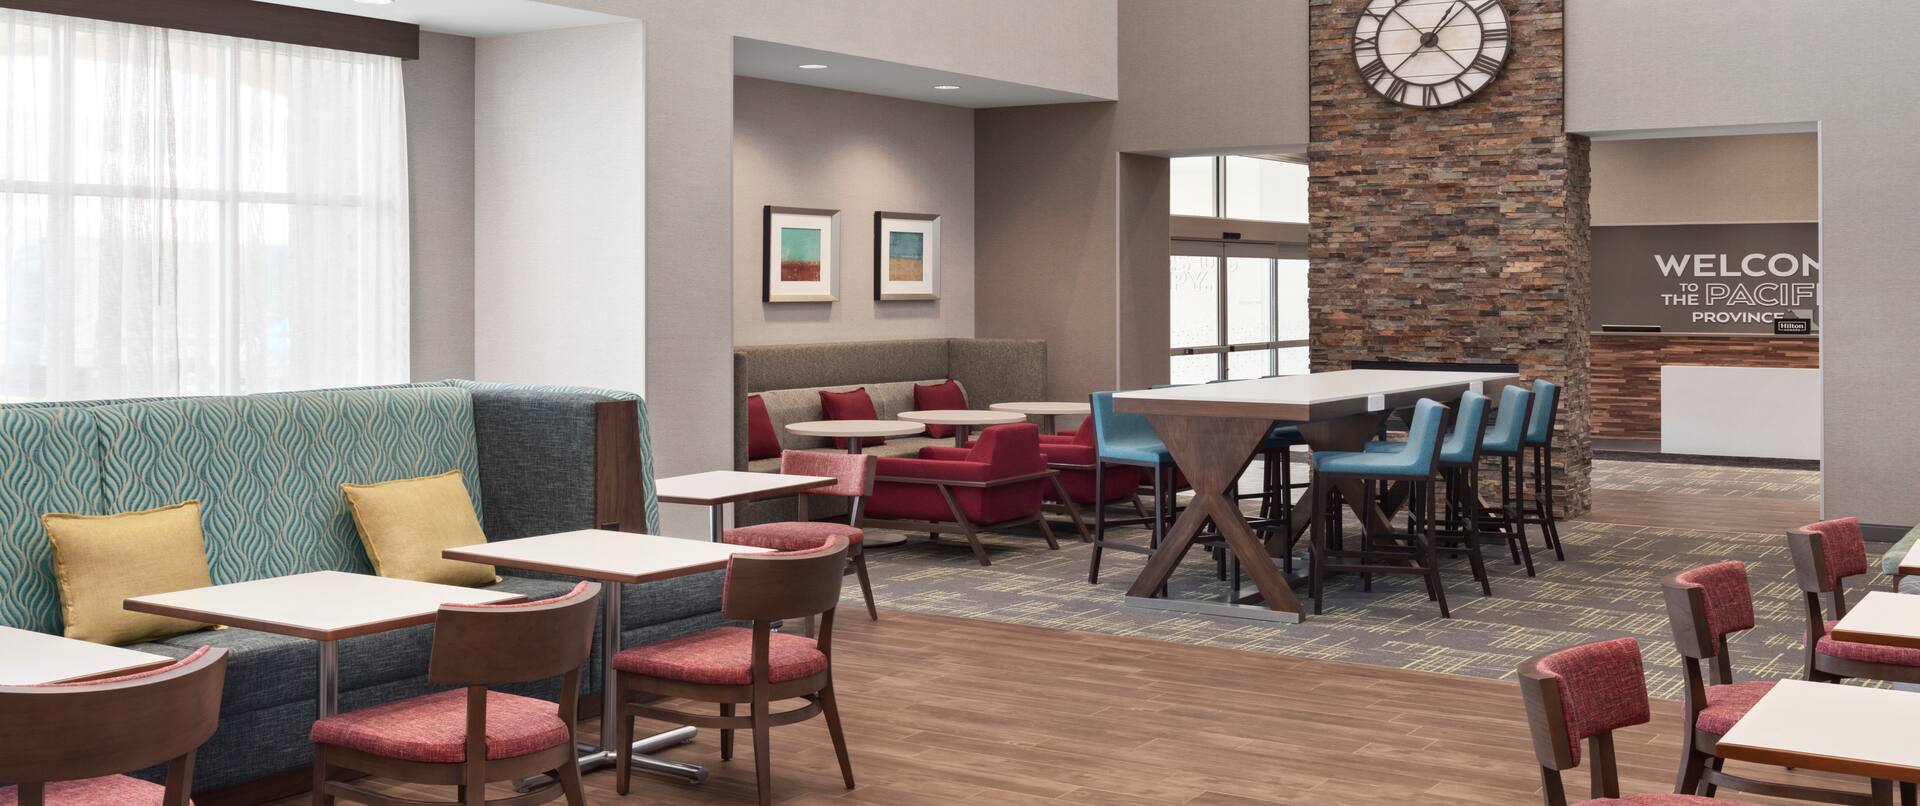 Lobby area with tables and chairs